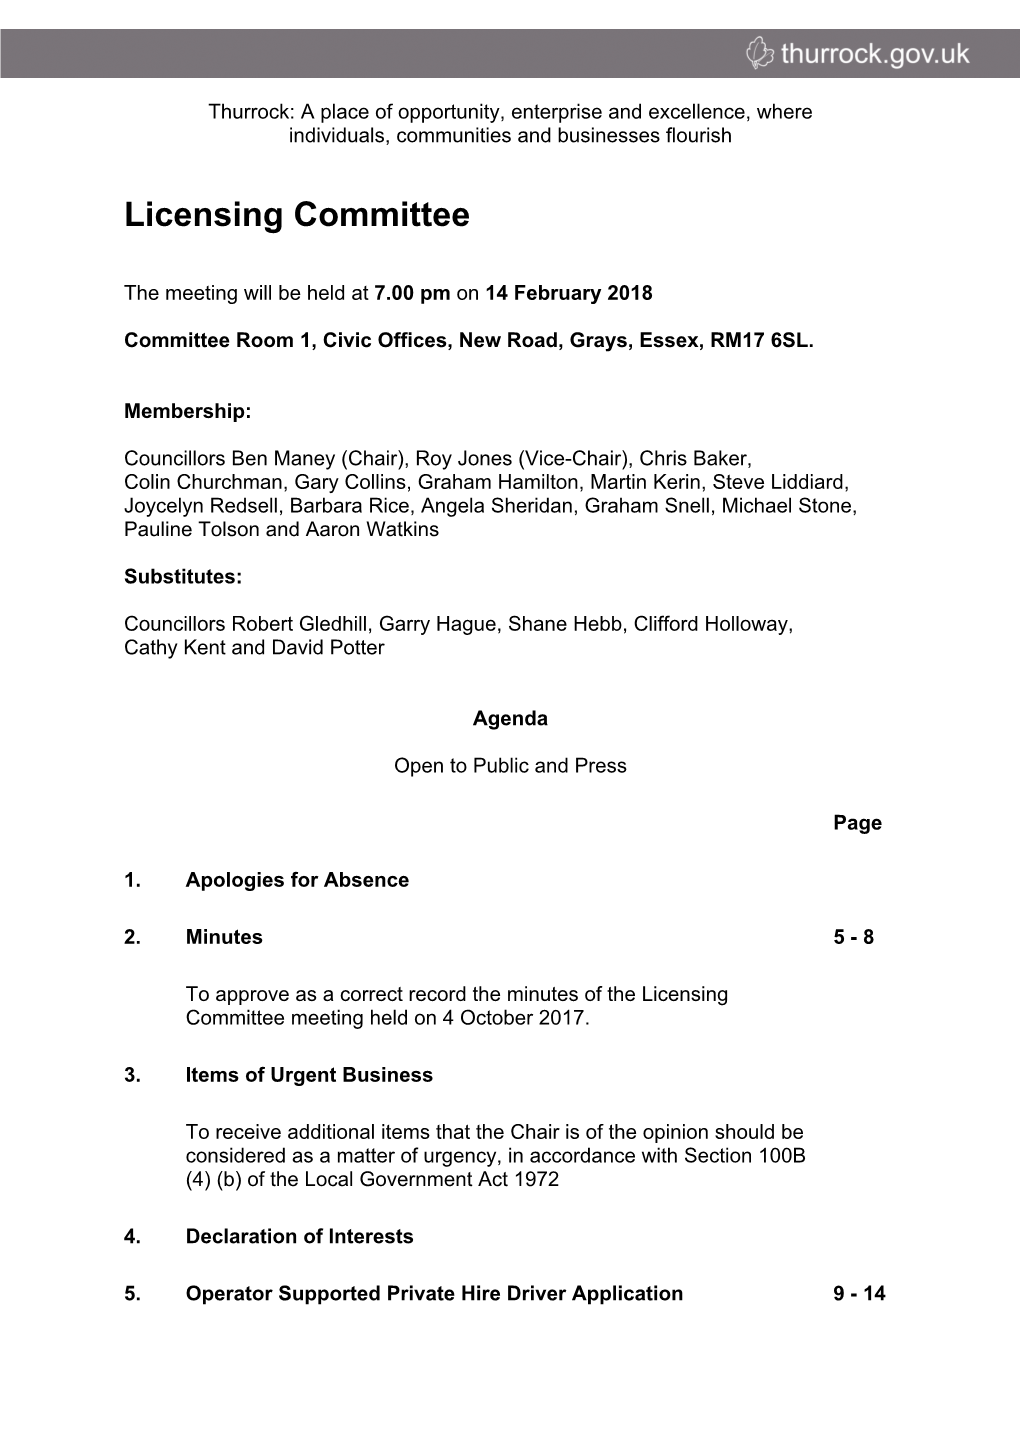 (Public Pack)Agenda Document for Licensing Committee, 14/02/2018